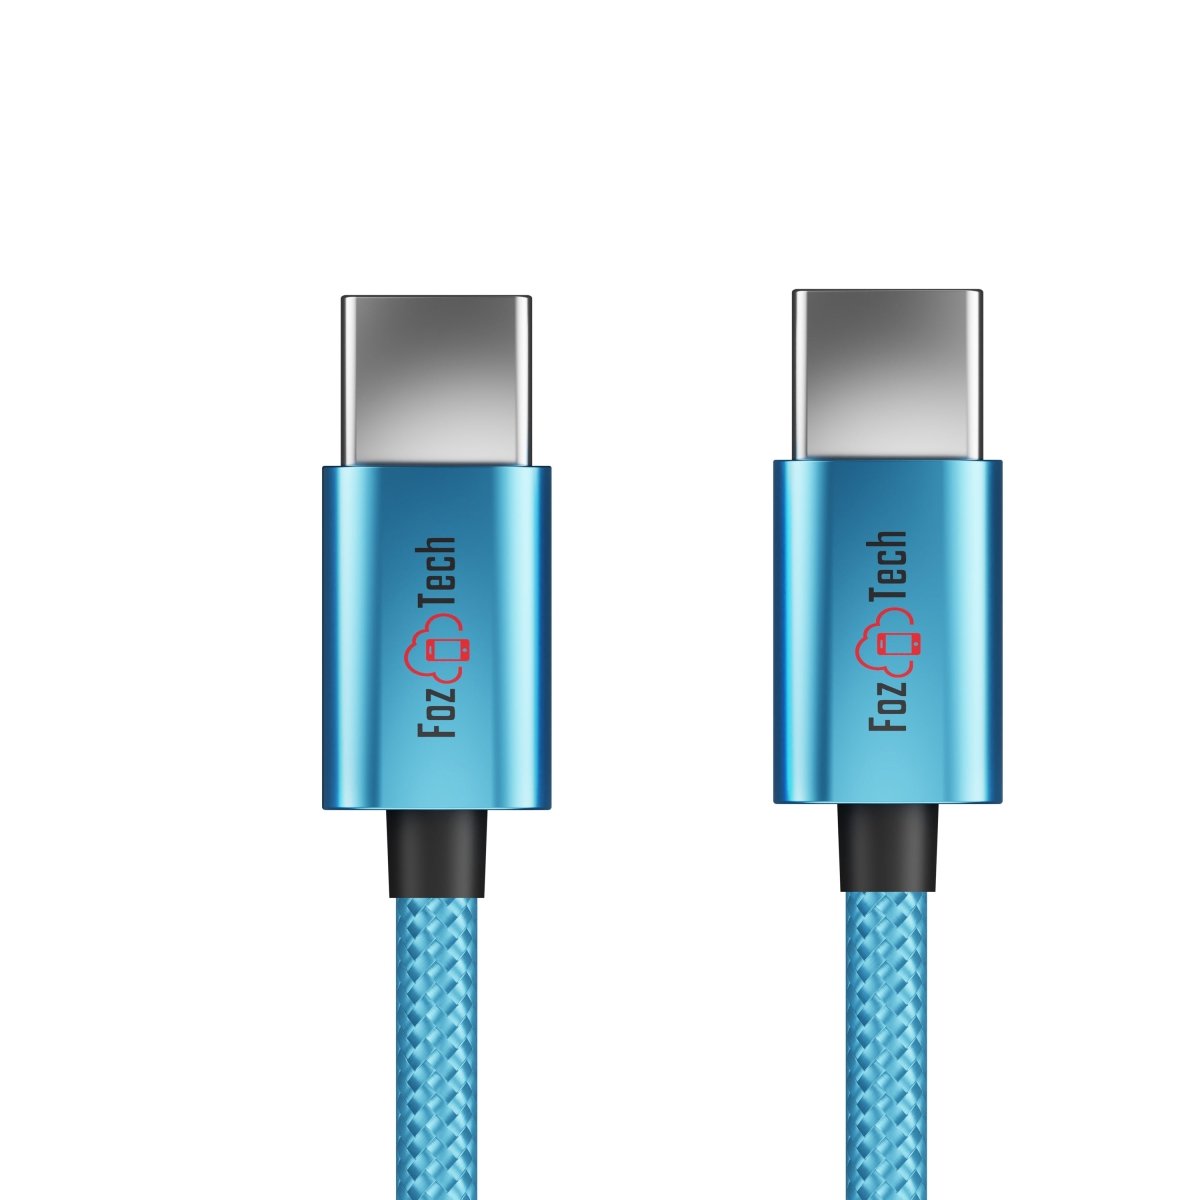 FozTech - CORE Series - USB-C to USB-C Fast Charger USB 2.0 Data Transfer Lead - Blue - USB Cable - FozTech Official Store